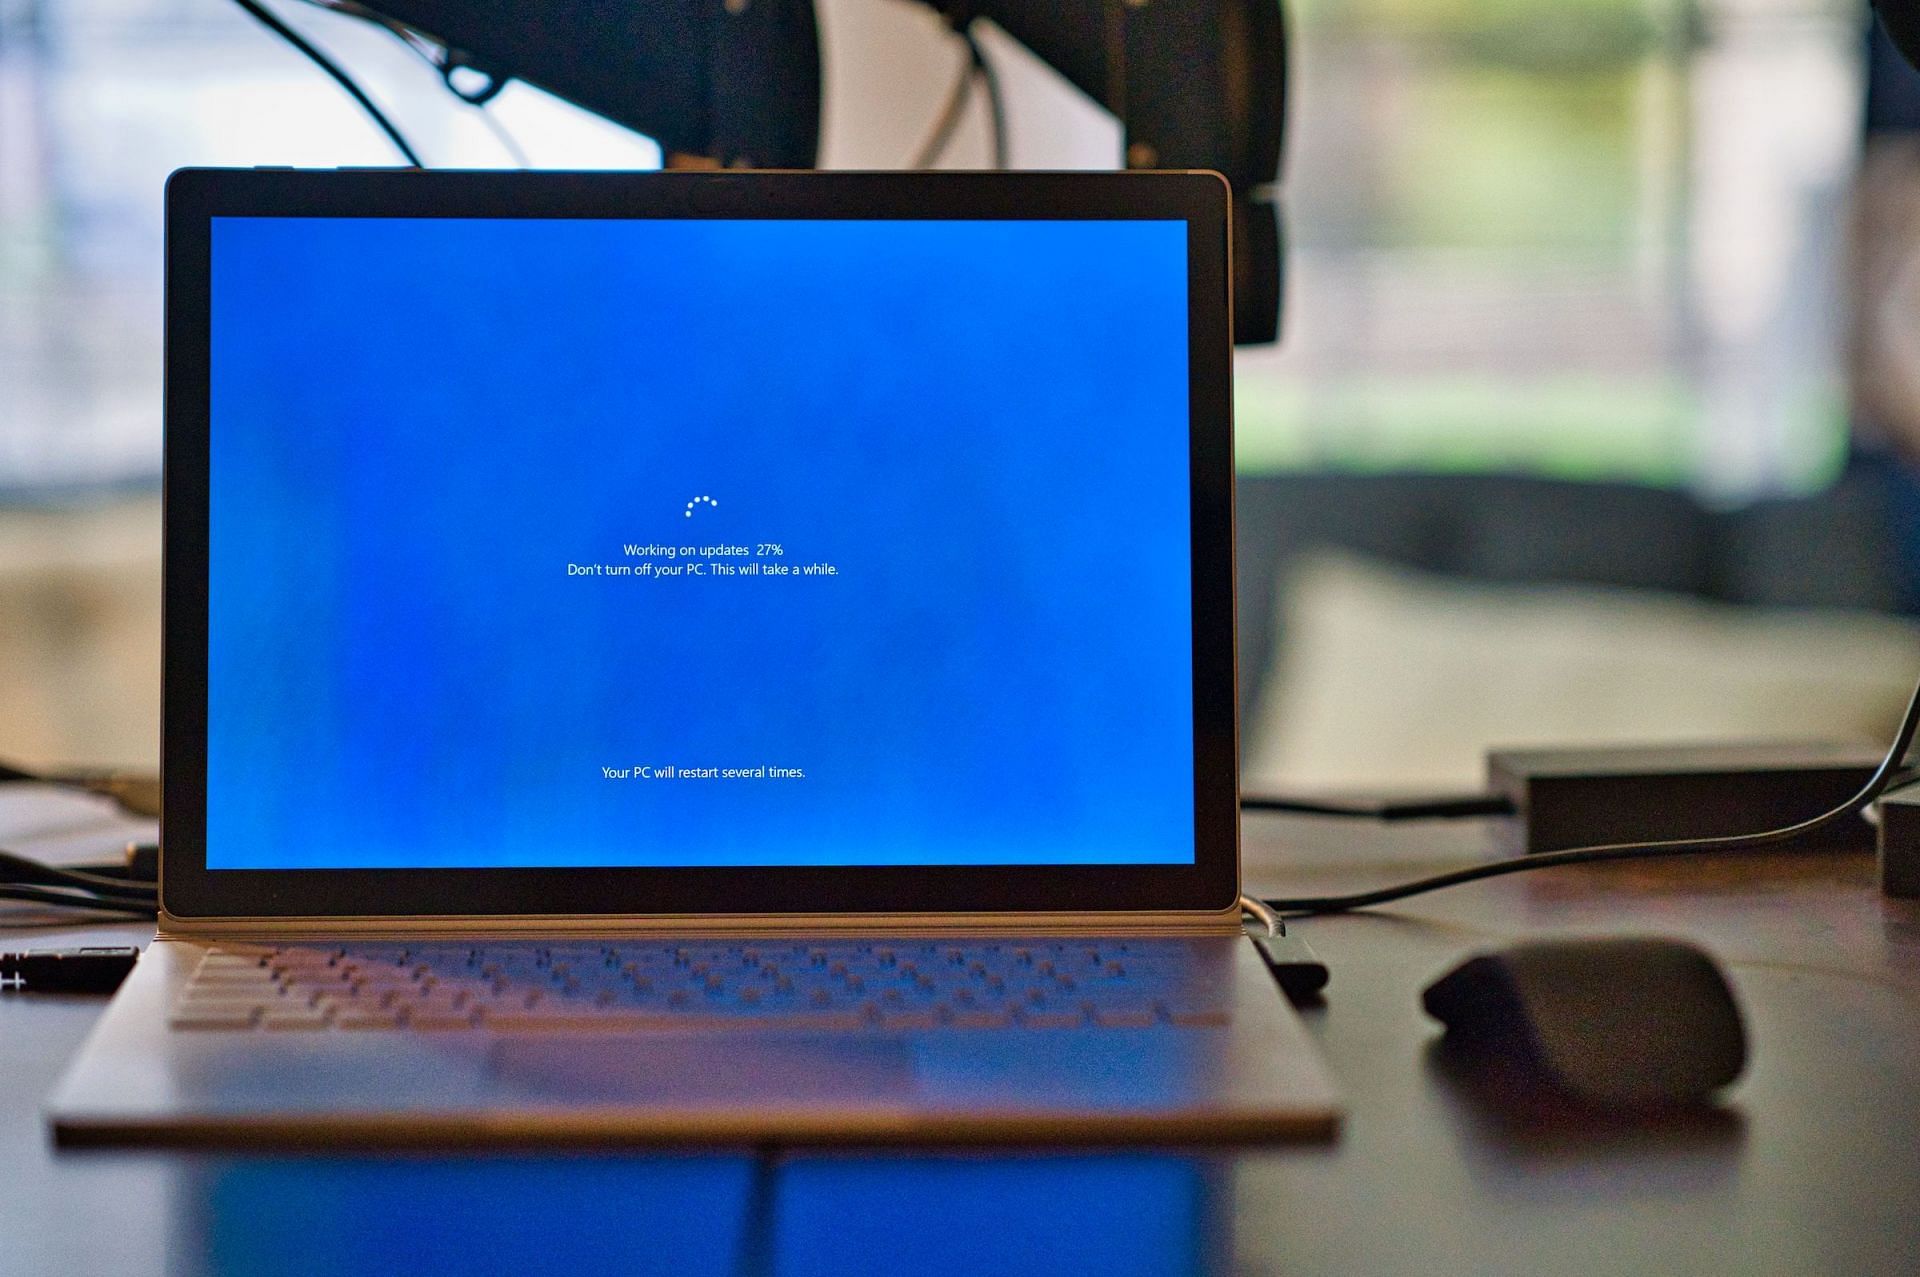 How to Prevent Windows 10 From Downloading Updates Automatically (Image via Unsplash)